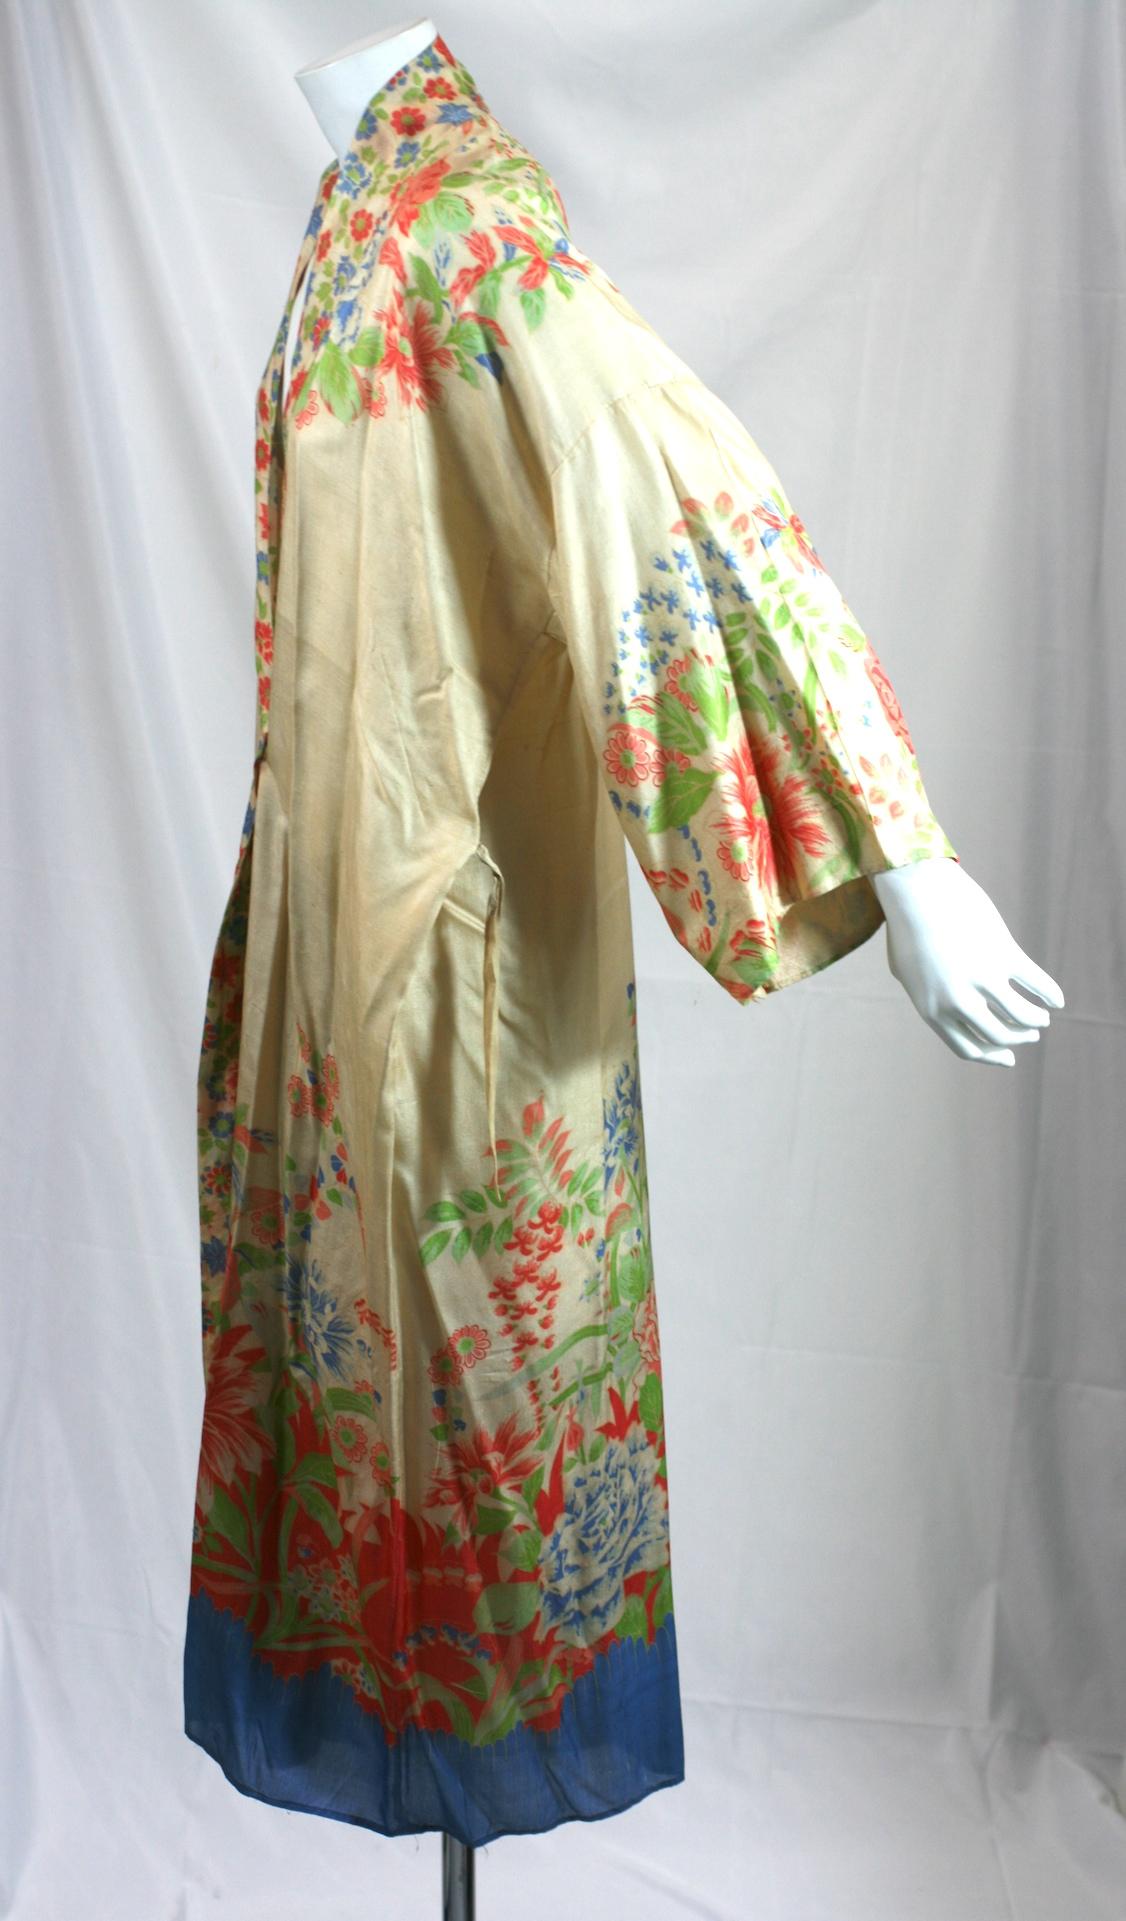 Printed silk pongee Art Deco lounging kimono of Japanese manufacture for the western market 1920s. The tan ground unusually printed in greens, oranges and and blues imitating Japanese screen painting. Wonderful unusual printed floral motifs. Unusual